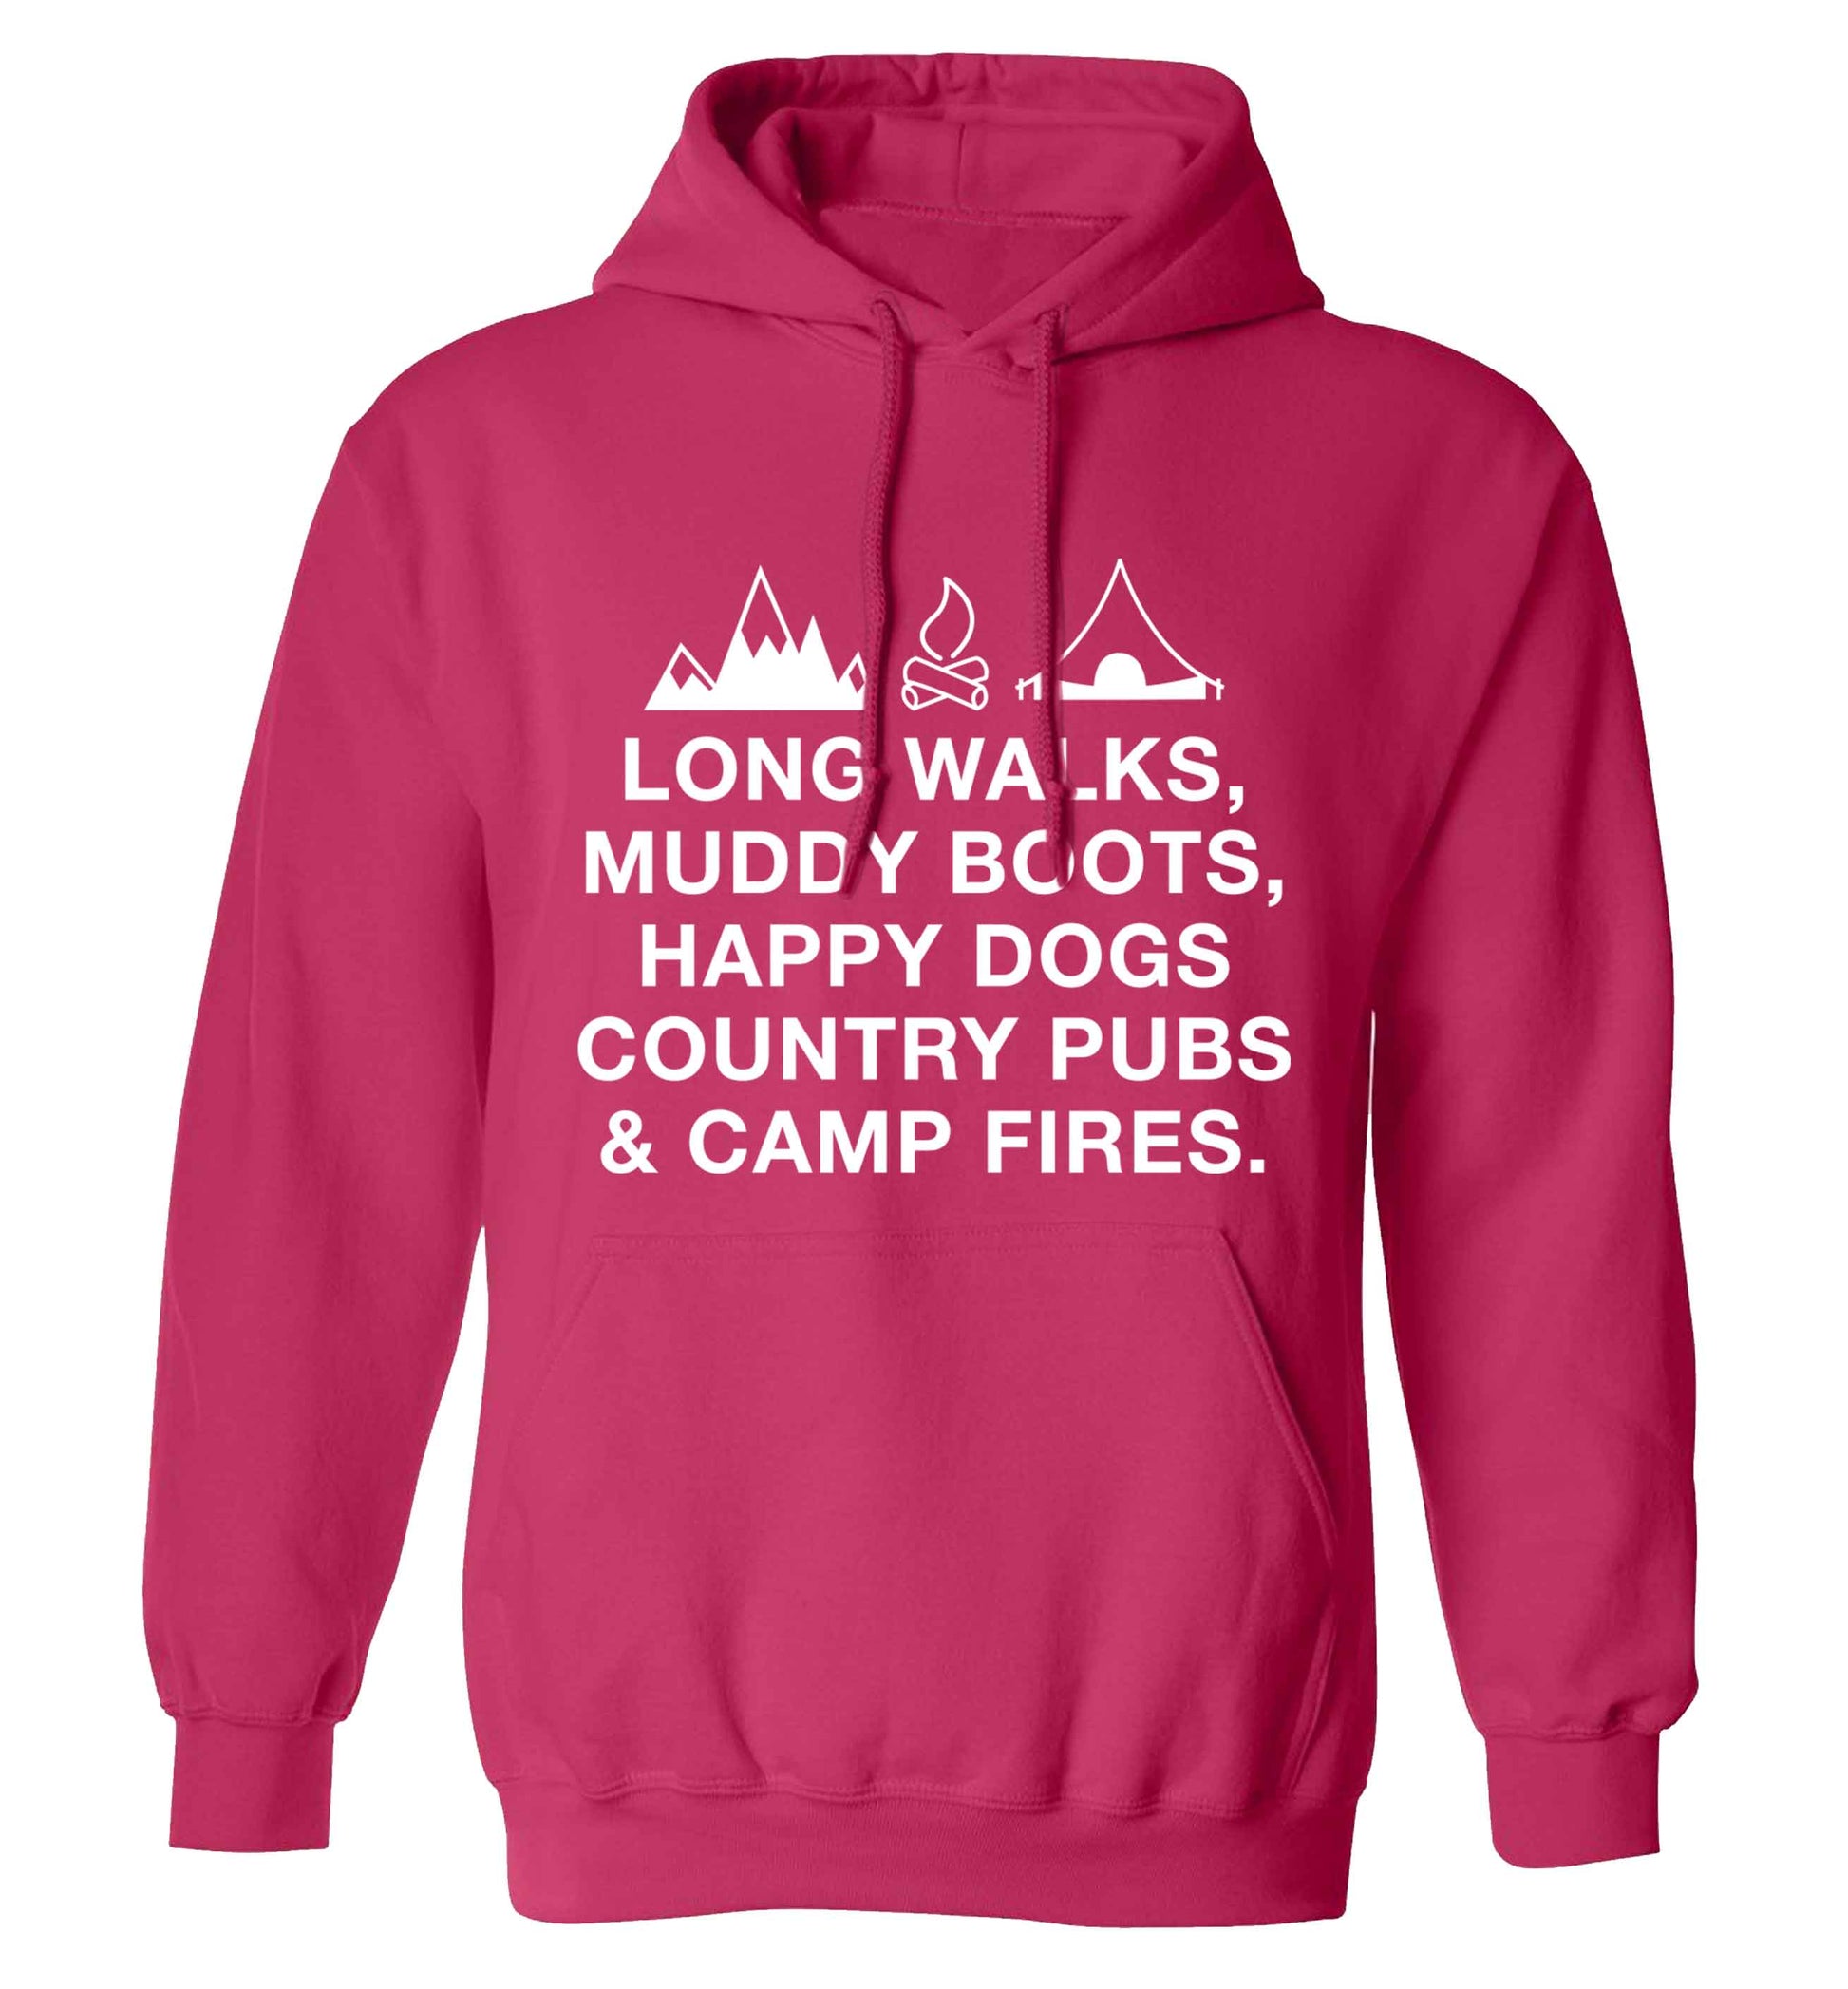 Long walks muddy boots happy dogs country pubs and camp fires adults unisex pink hoodie 2XL